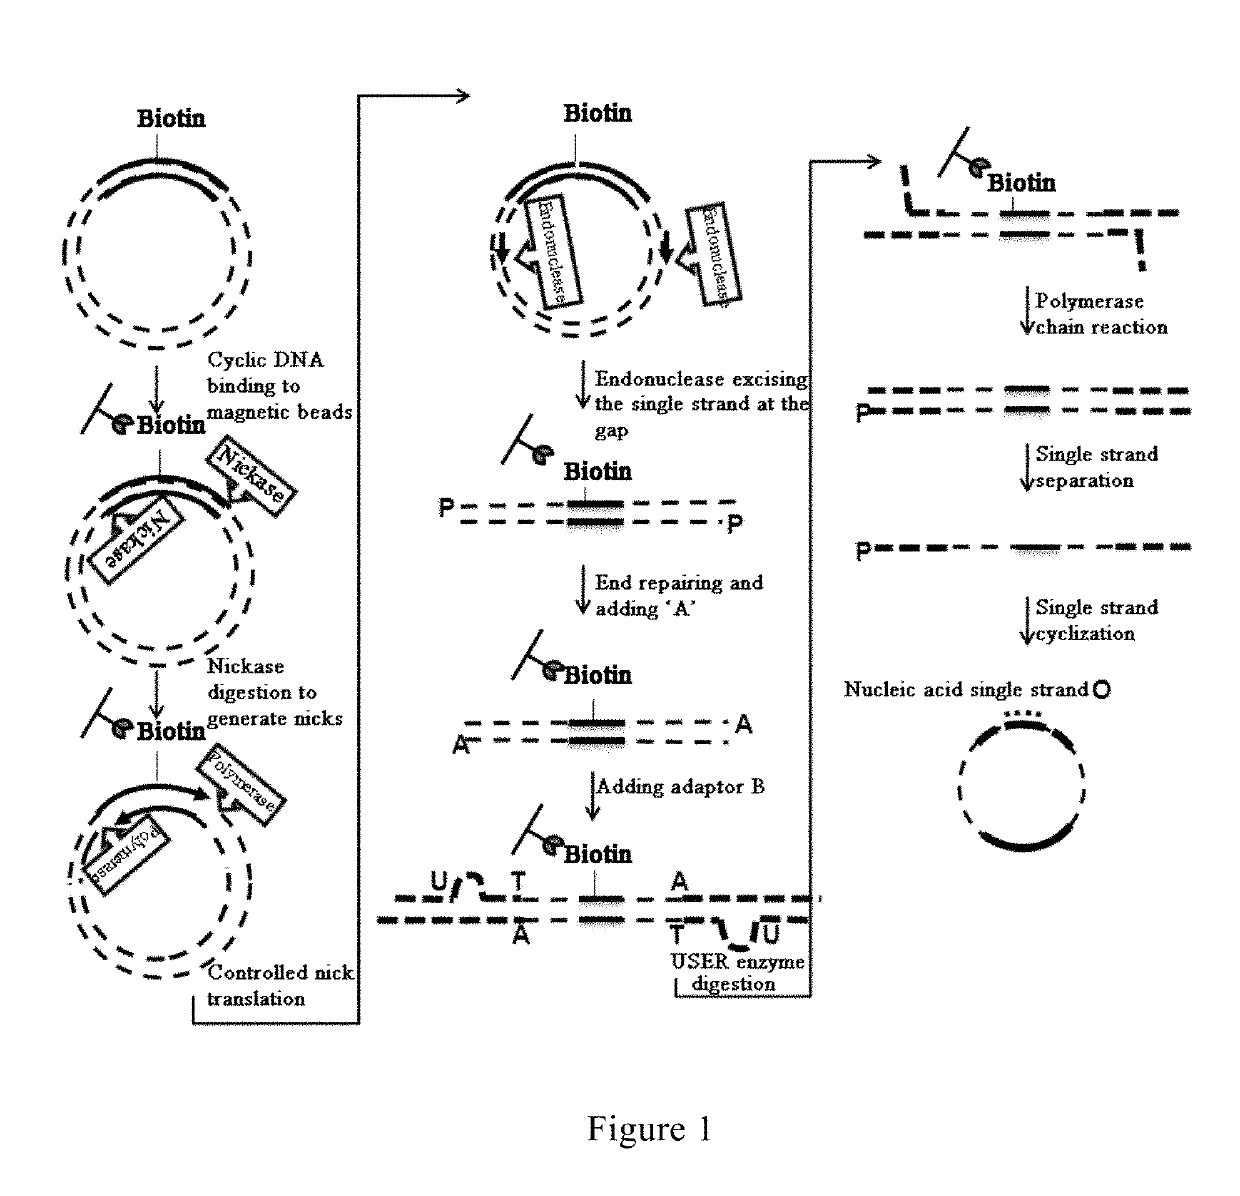 Method and reagent for constructing nucleic acid double-linker single-strand cyclical library